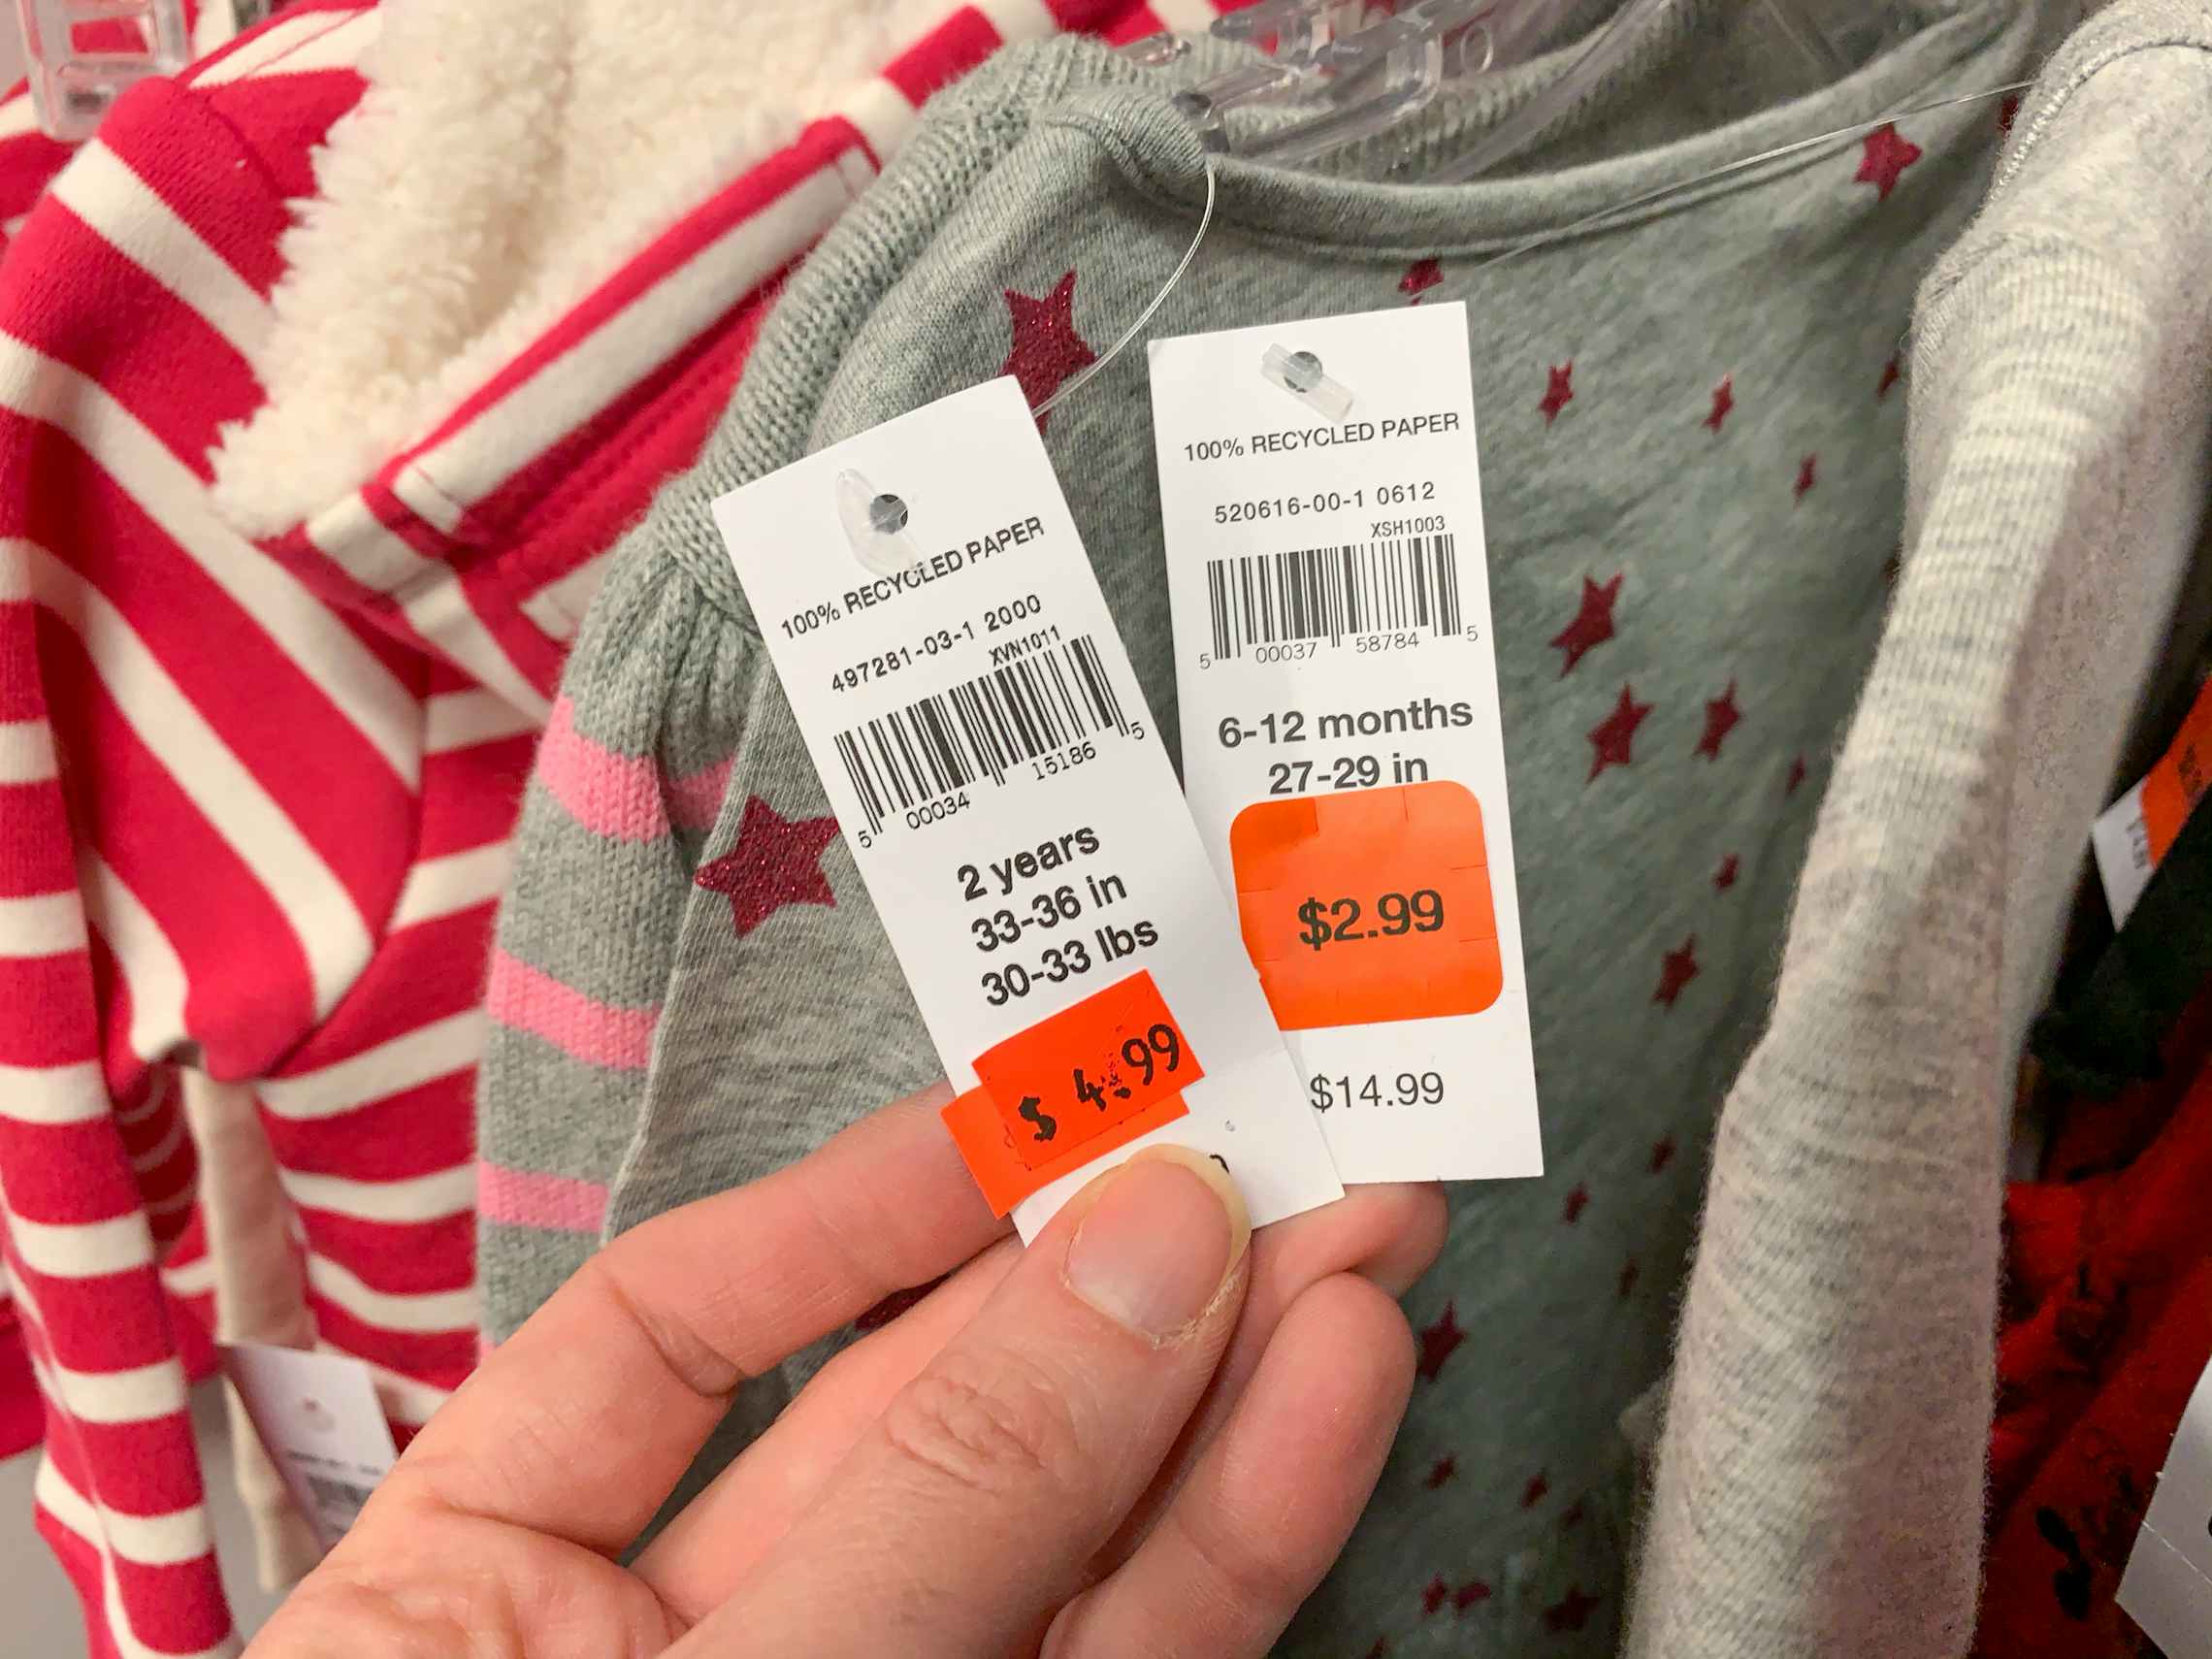 Orange clearance tags on two gap price tags.